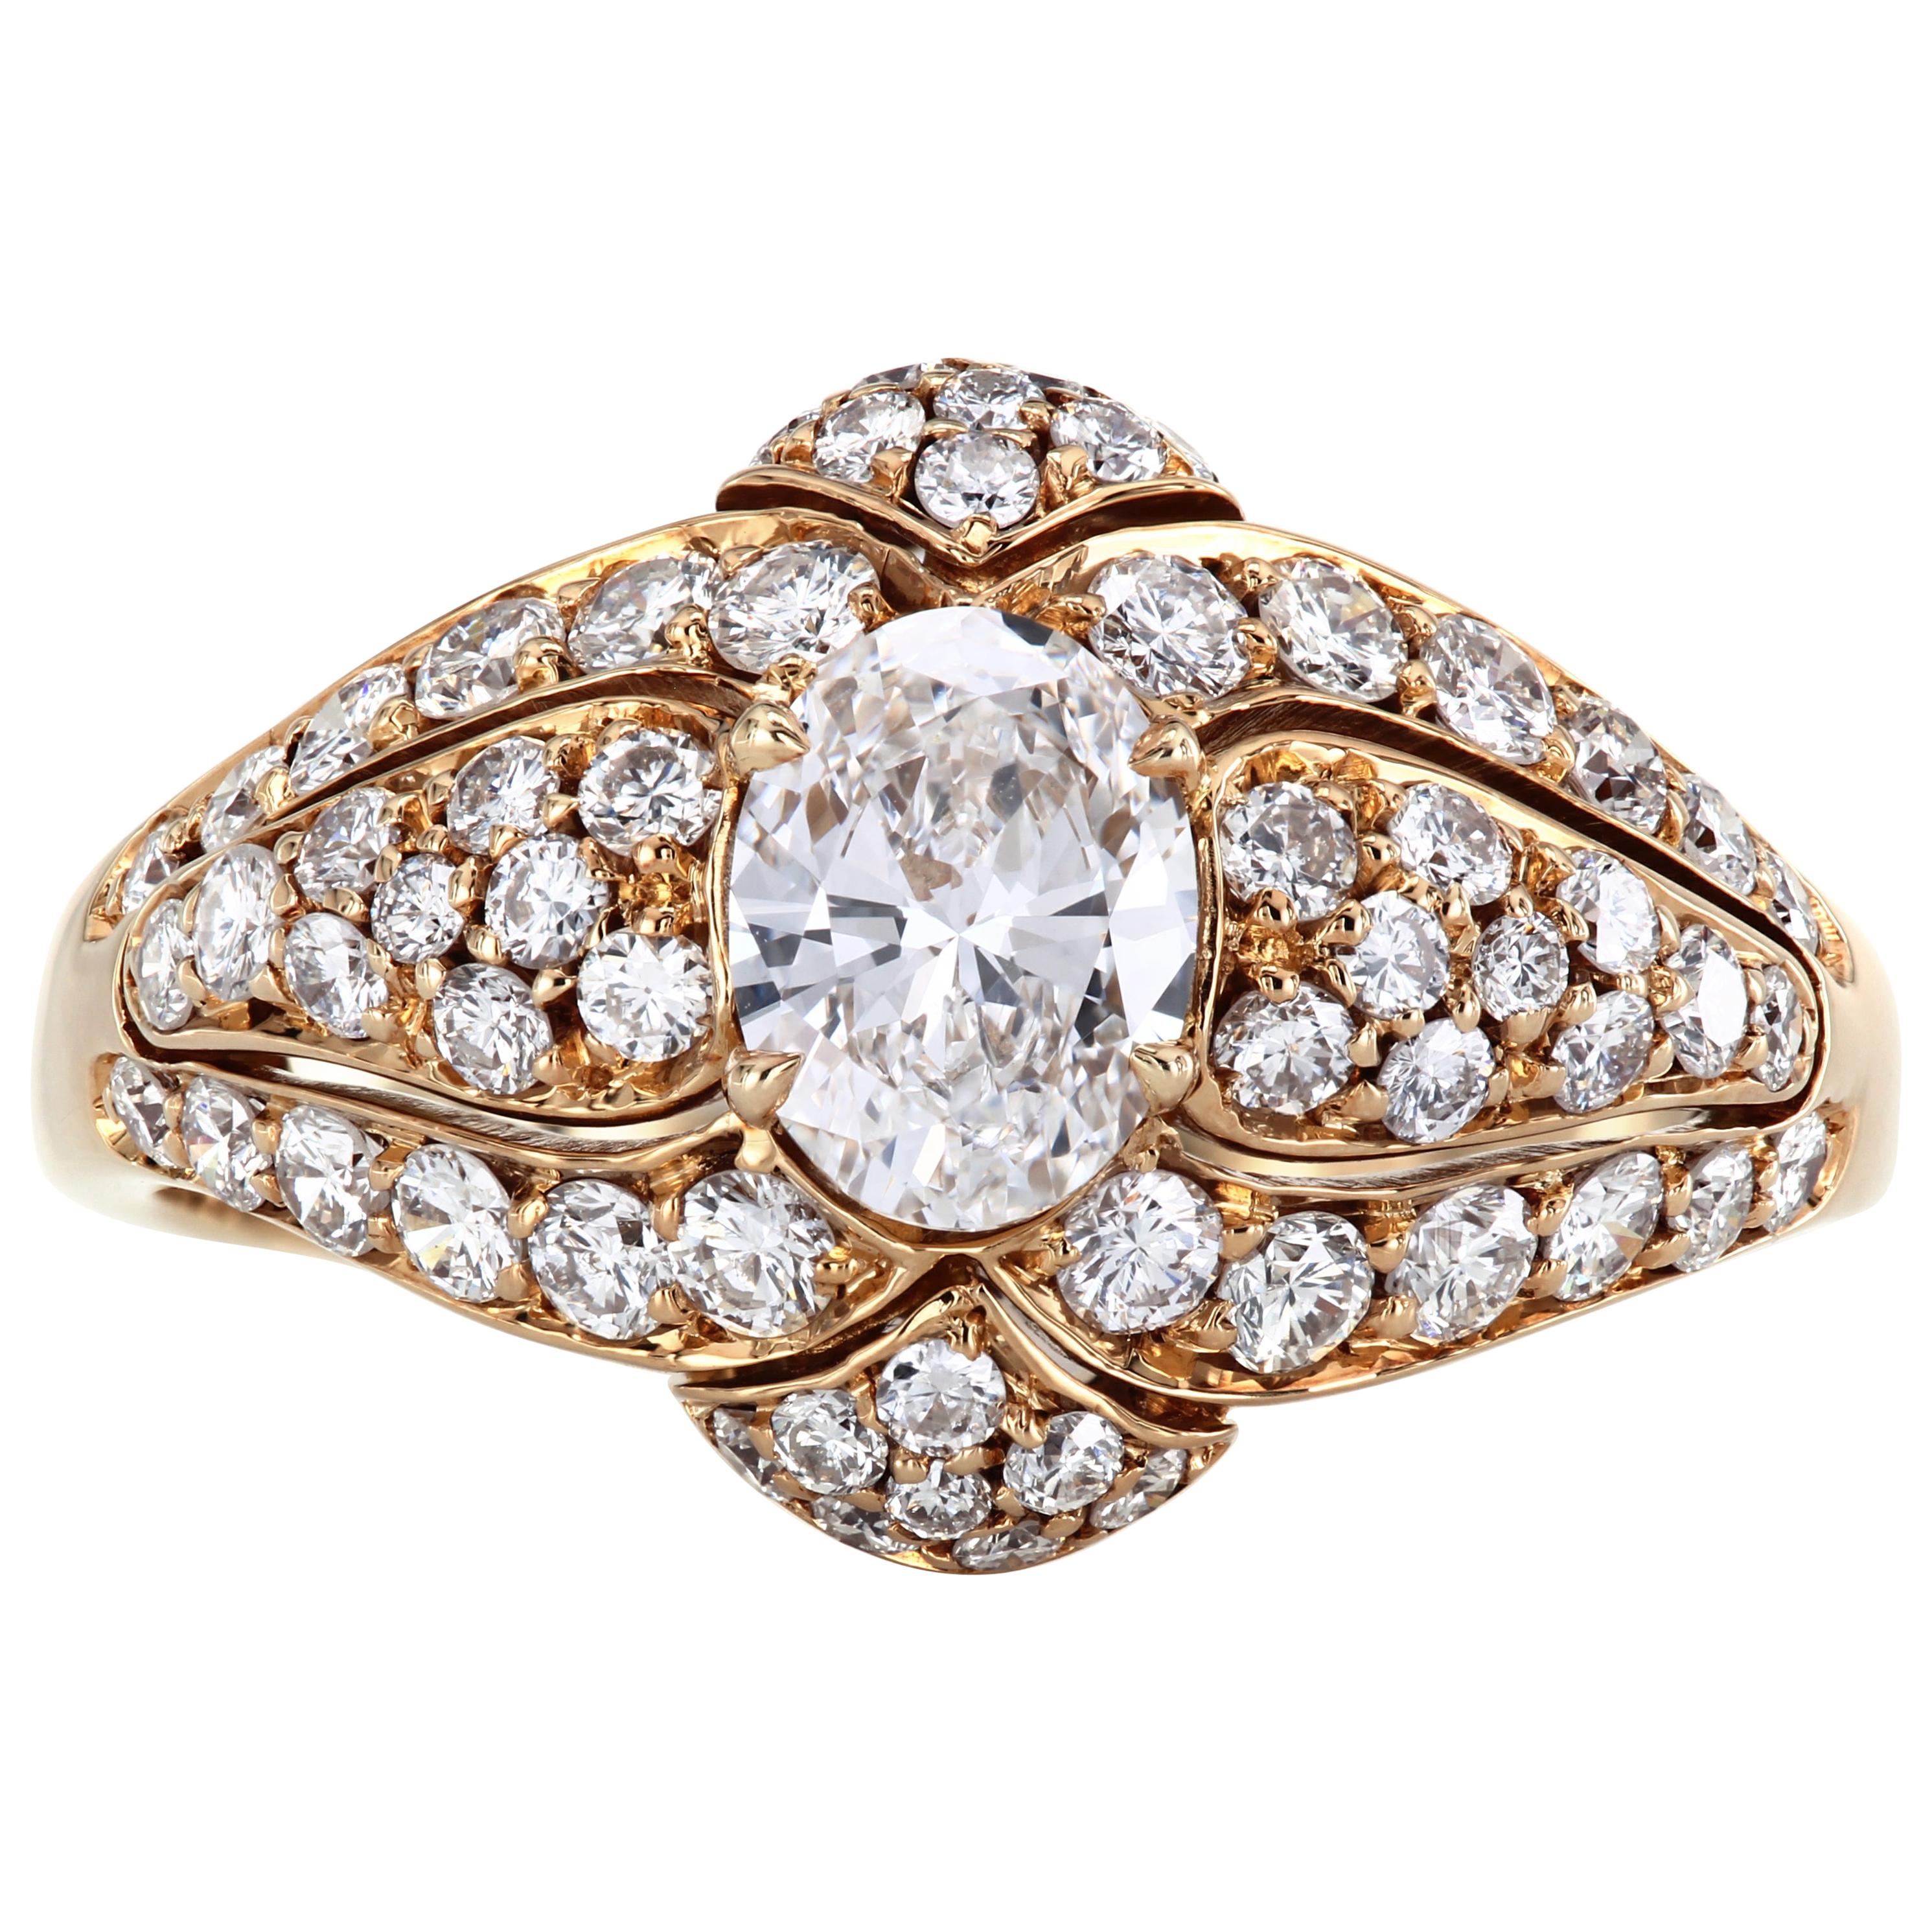 Van Cleef and Arpels ring with an oval diamond approx. 0.55-ct  D/E  VVS
Diamond pave - 60 diamonds approximately 1.5-carat weight
Stamped 5K332-7 Italy 18K
18K yellow gold 
Size 5, can be sized (additional charge)